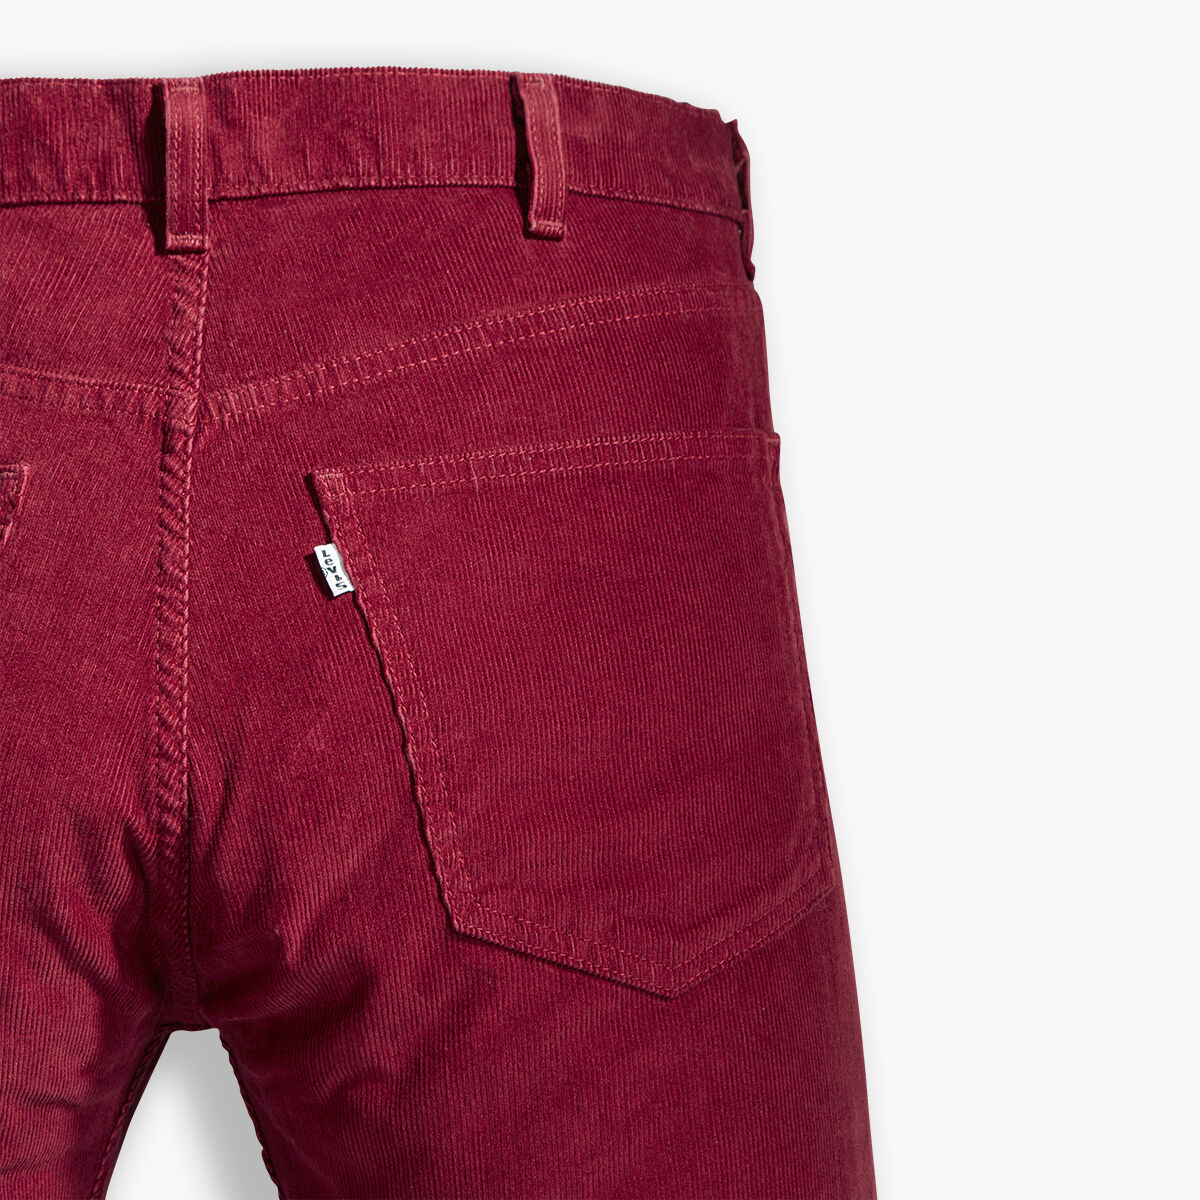 LEVI'S® VINTAGE CLOTHING1970'S 519™ CORDS OXBLOOD｜リーバイス